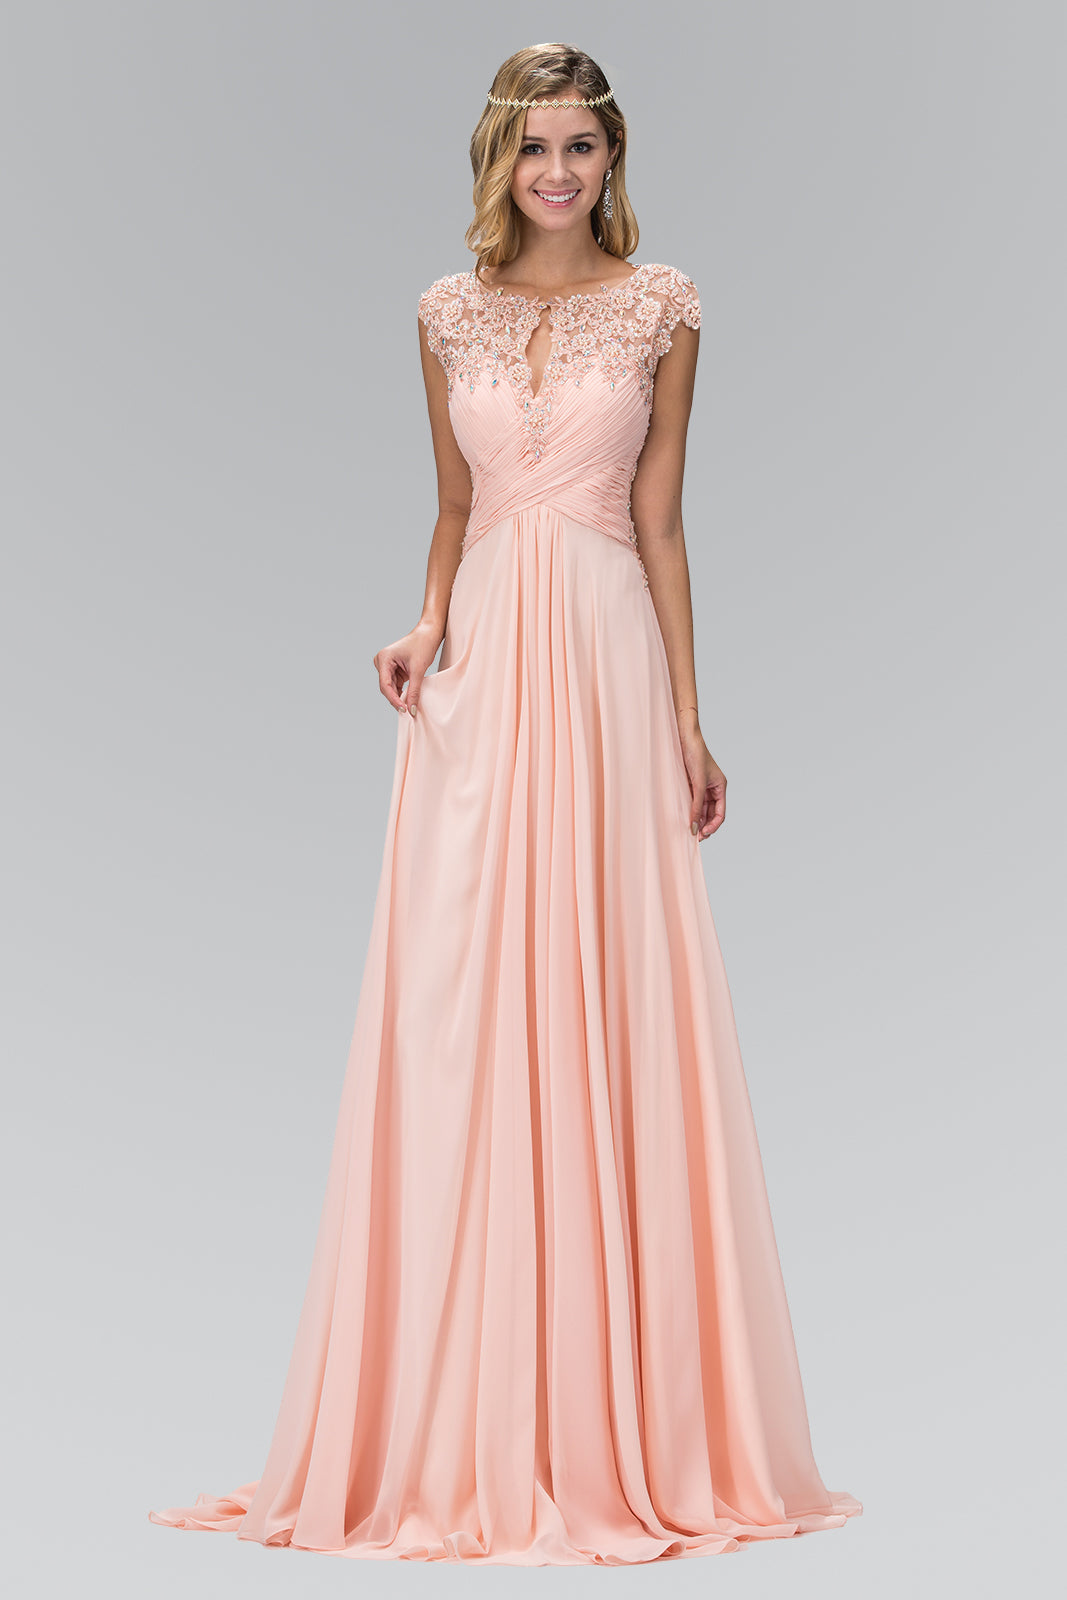 Long Formal Cap Sleeve Ruched Bodice Prom Dress - The Dress Outlet Elizabeth K Peach